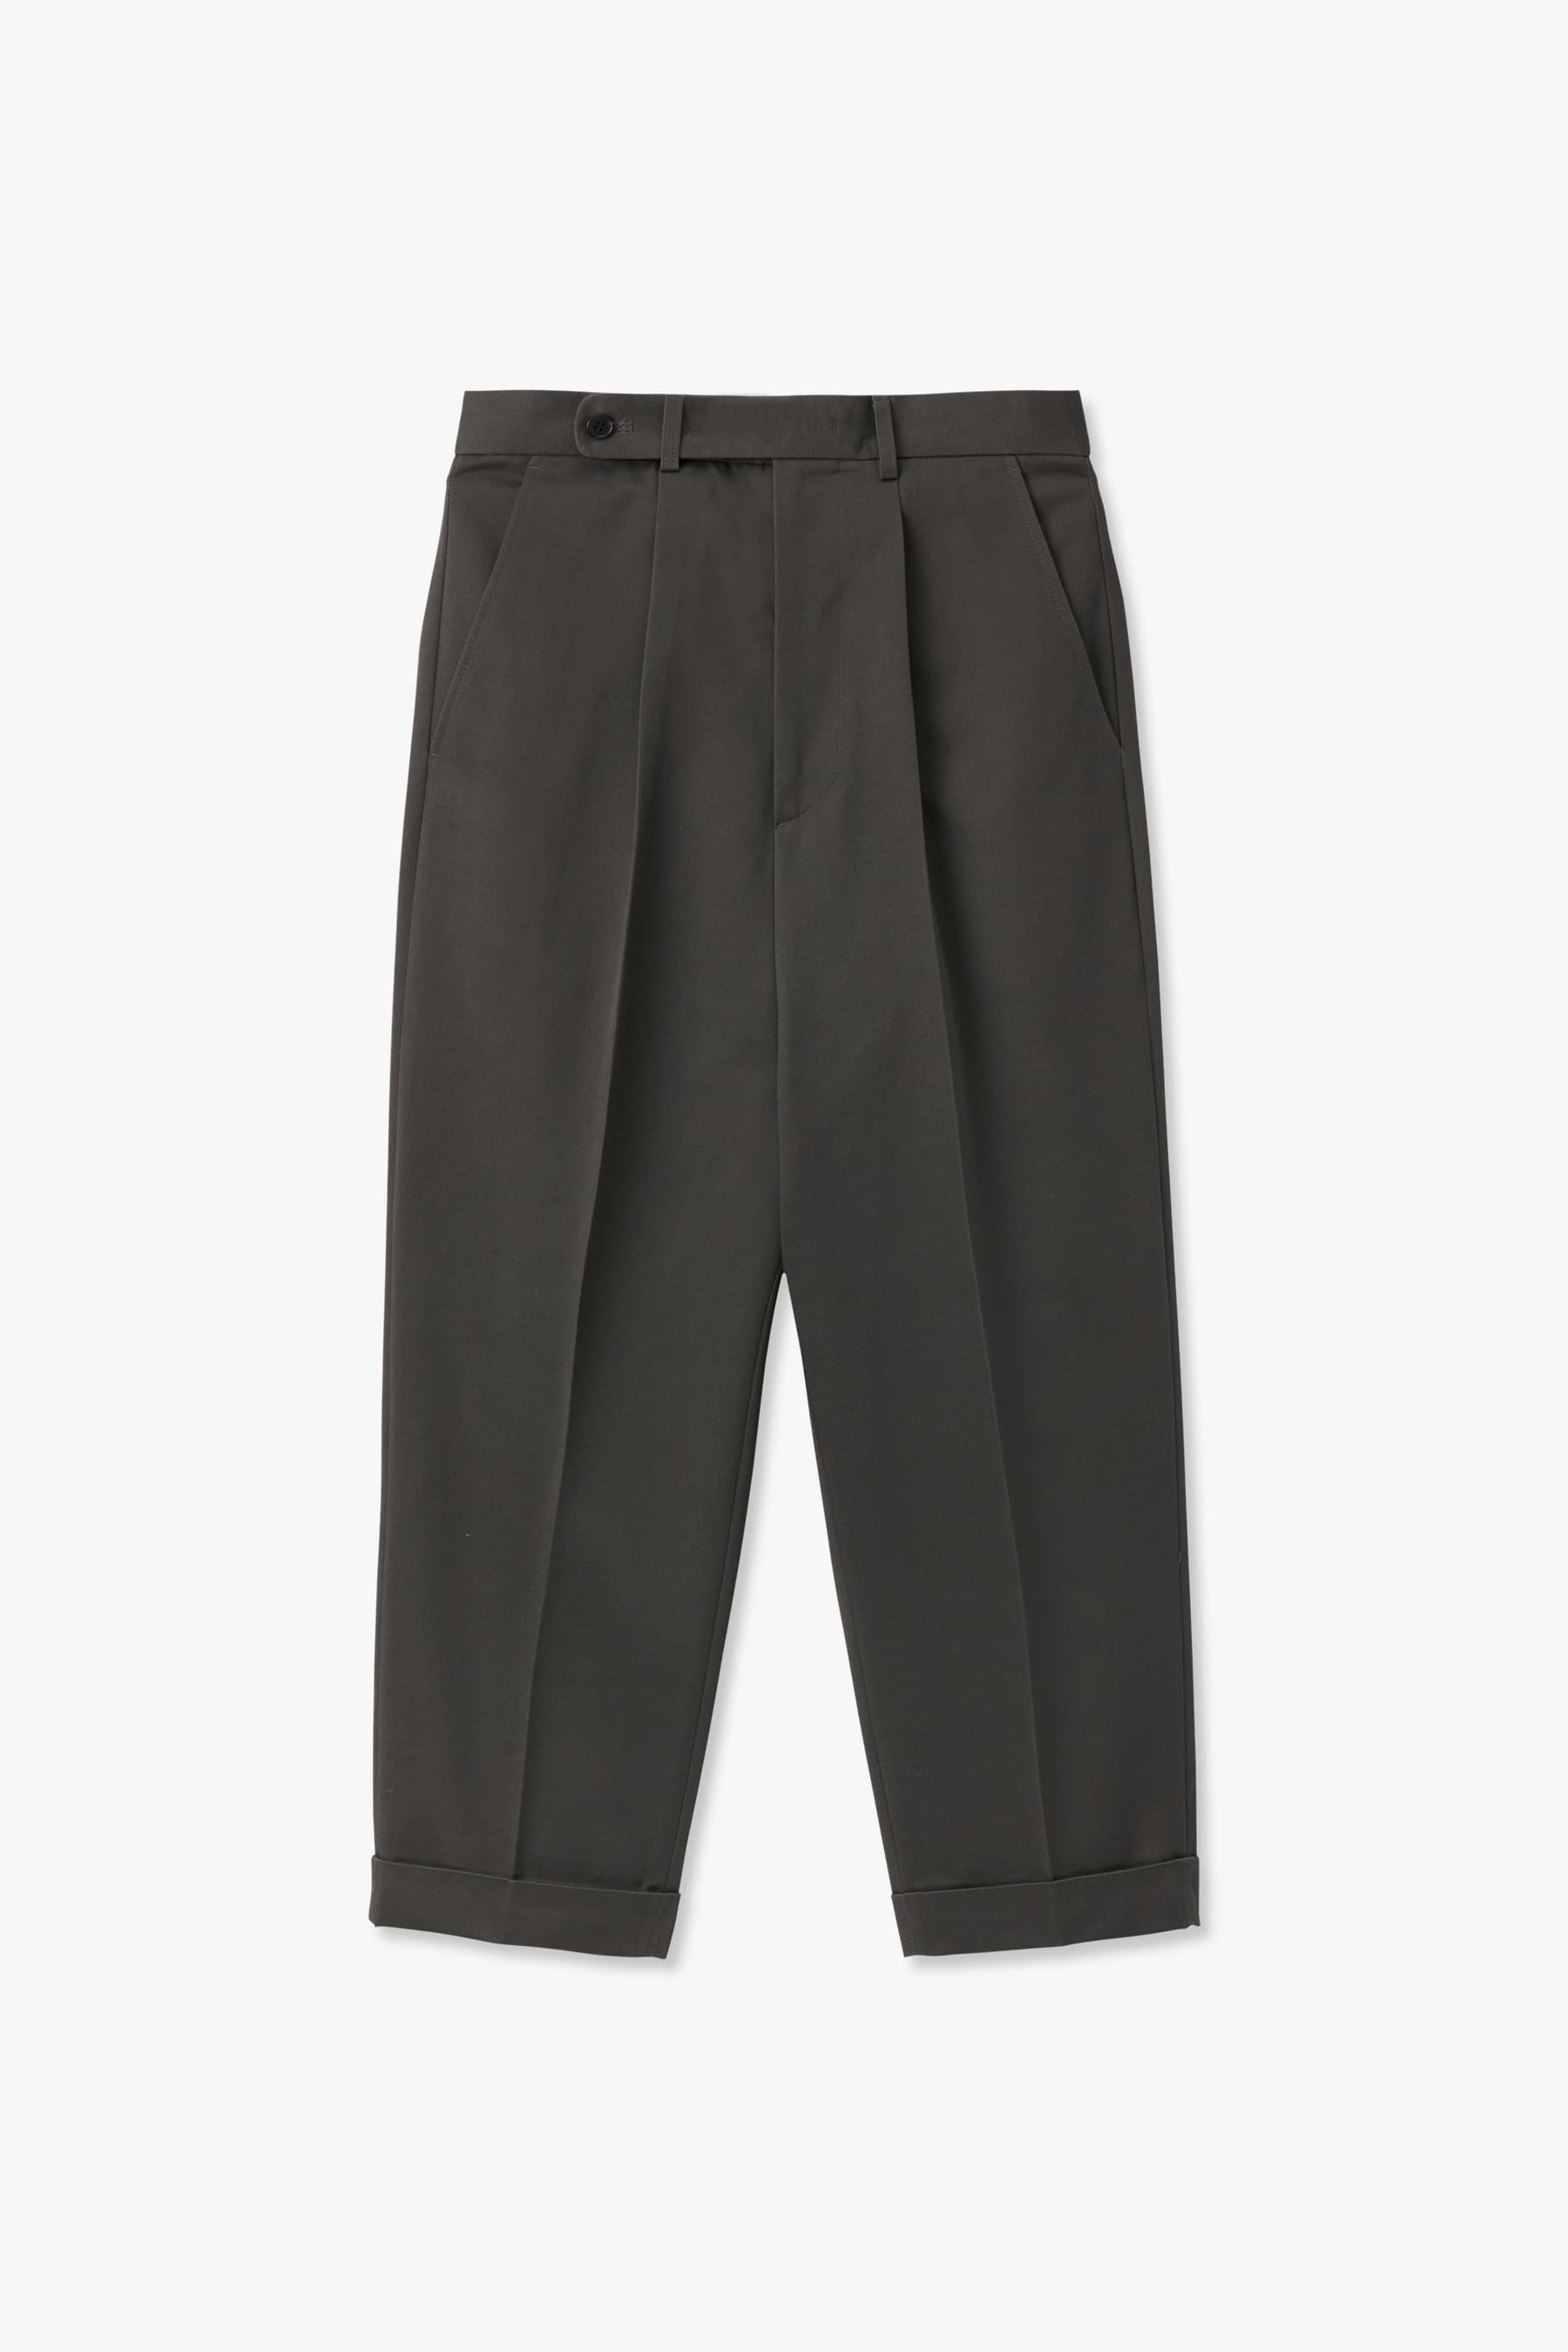 [DISTANCE] HIGH RISE WAIST TAPERED COTTON PANTS CHARCOAL